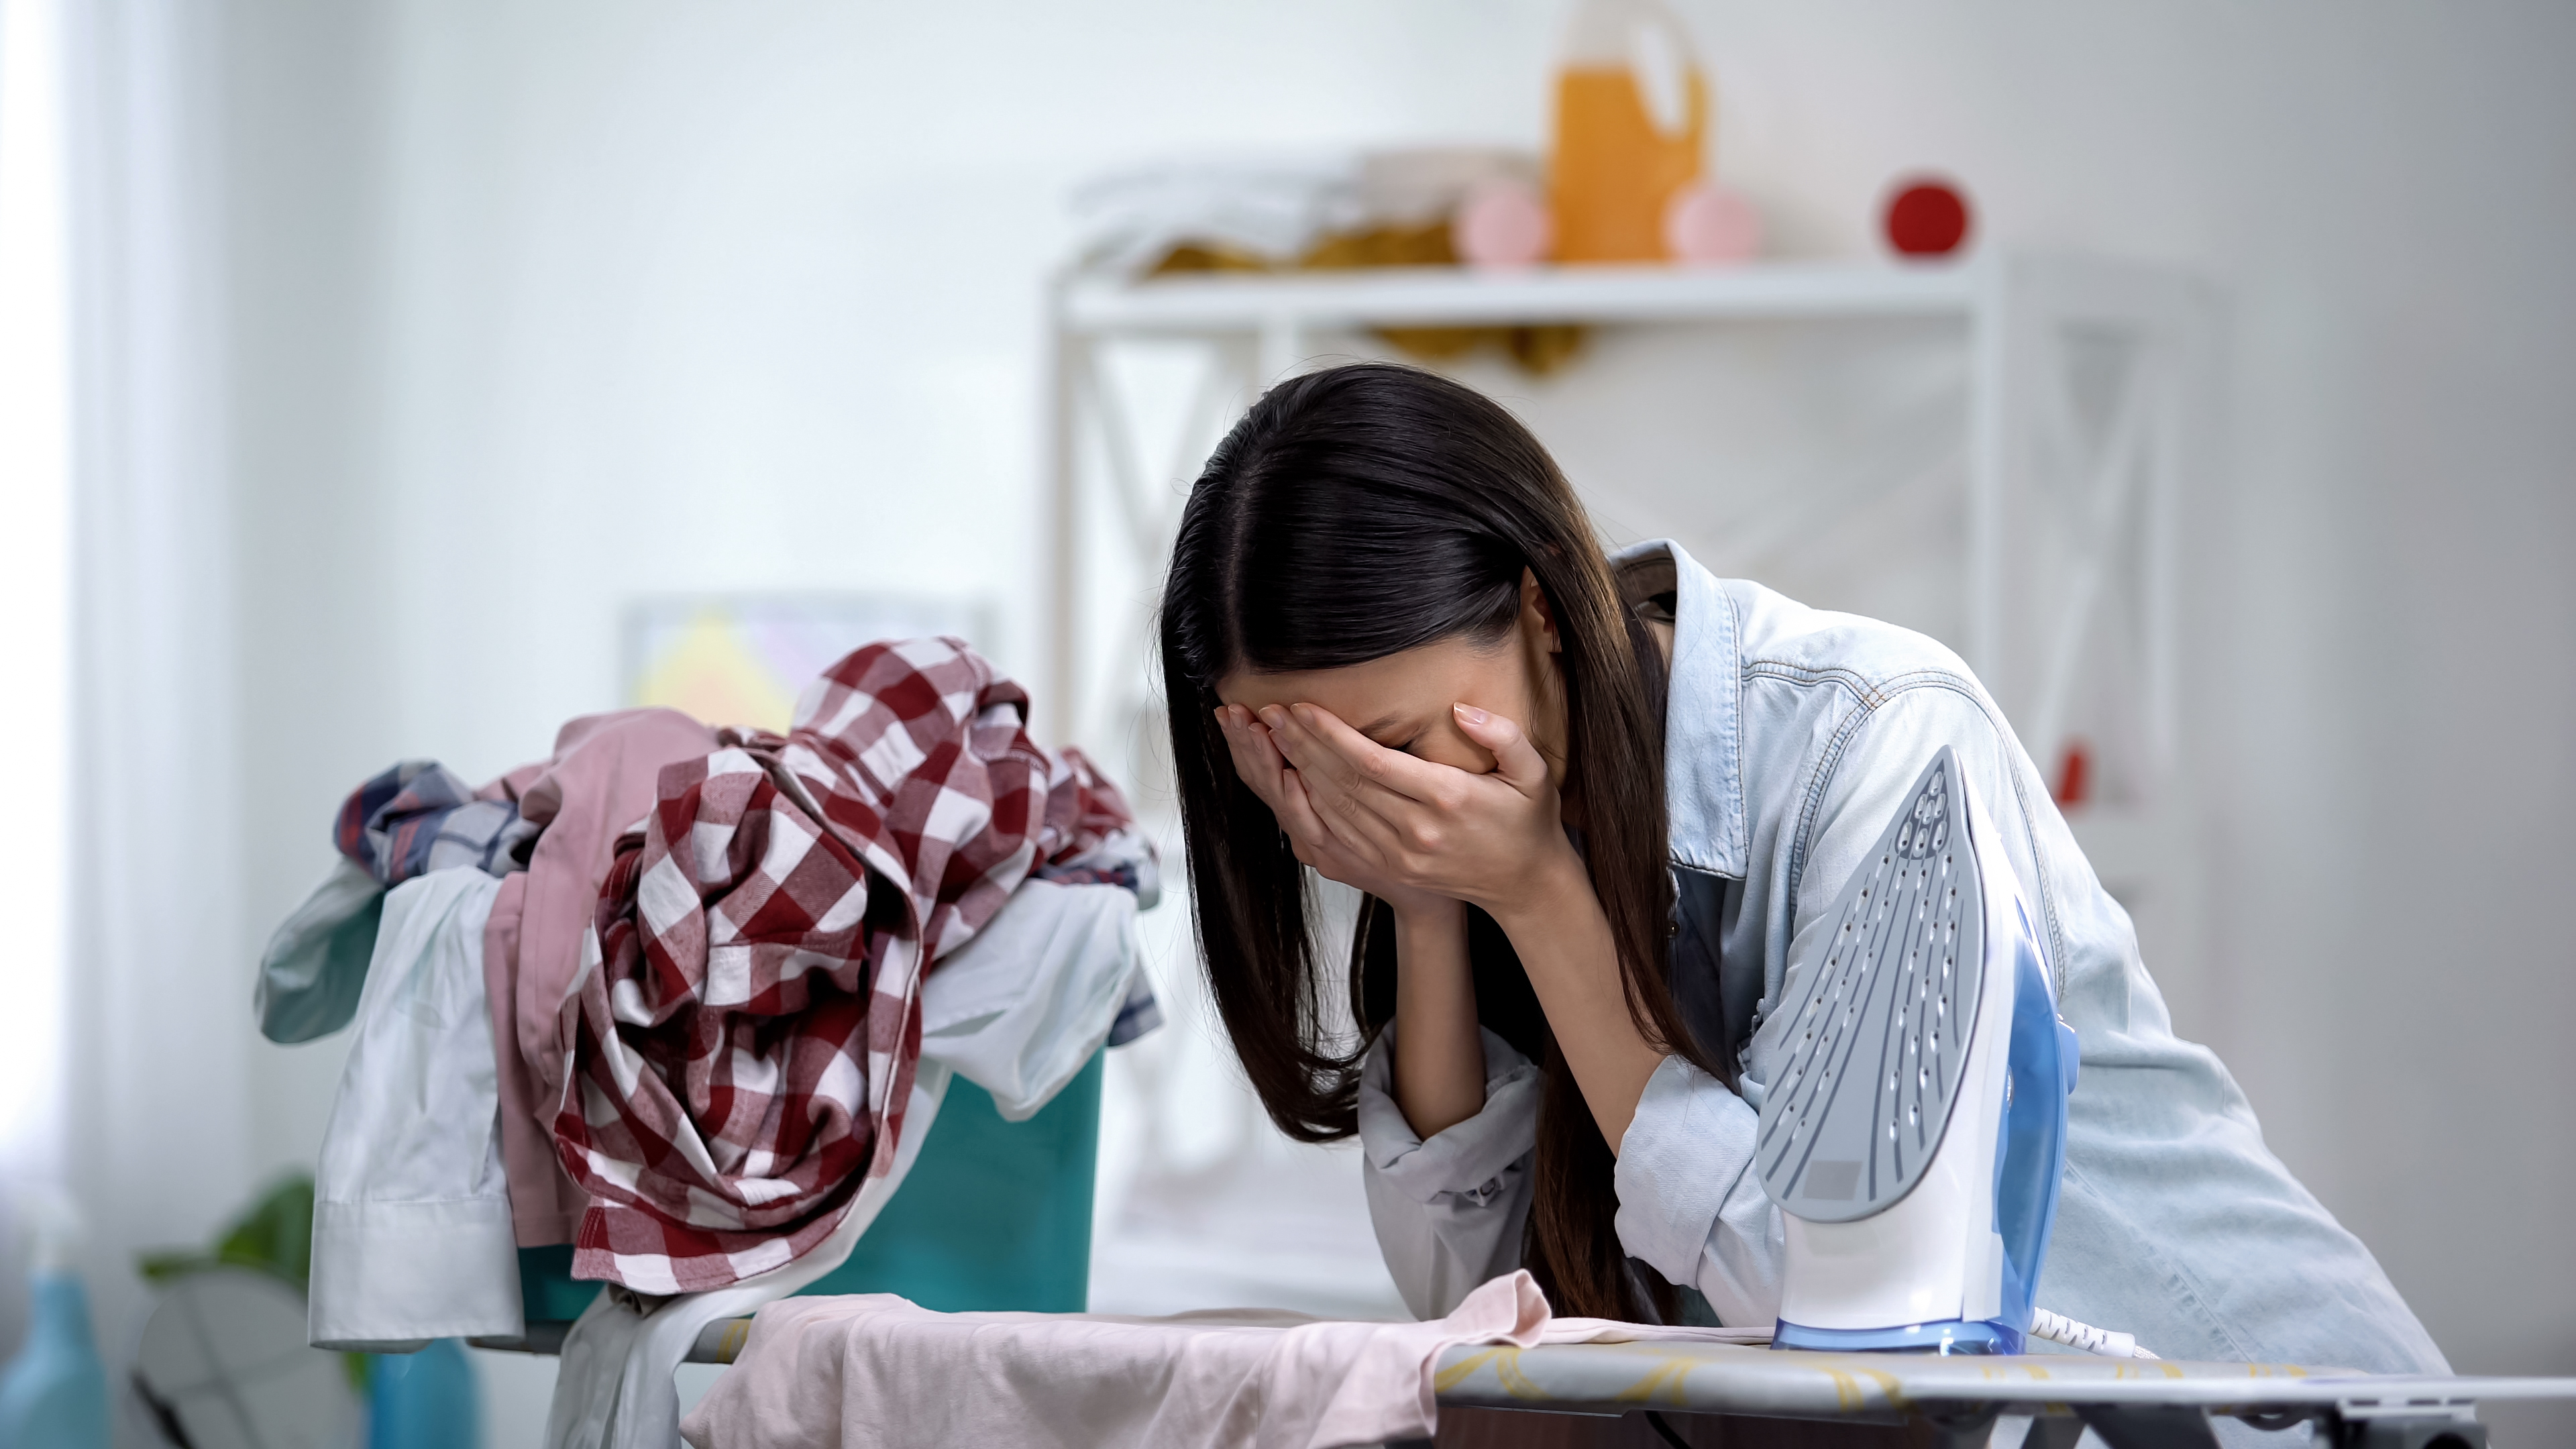 A stressed woman is pictured crying while leaning on the ironing board | Source: Shutterstock